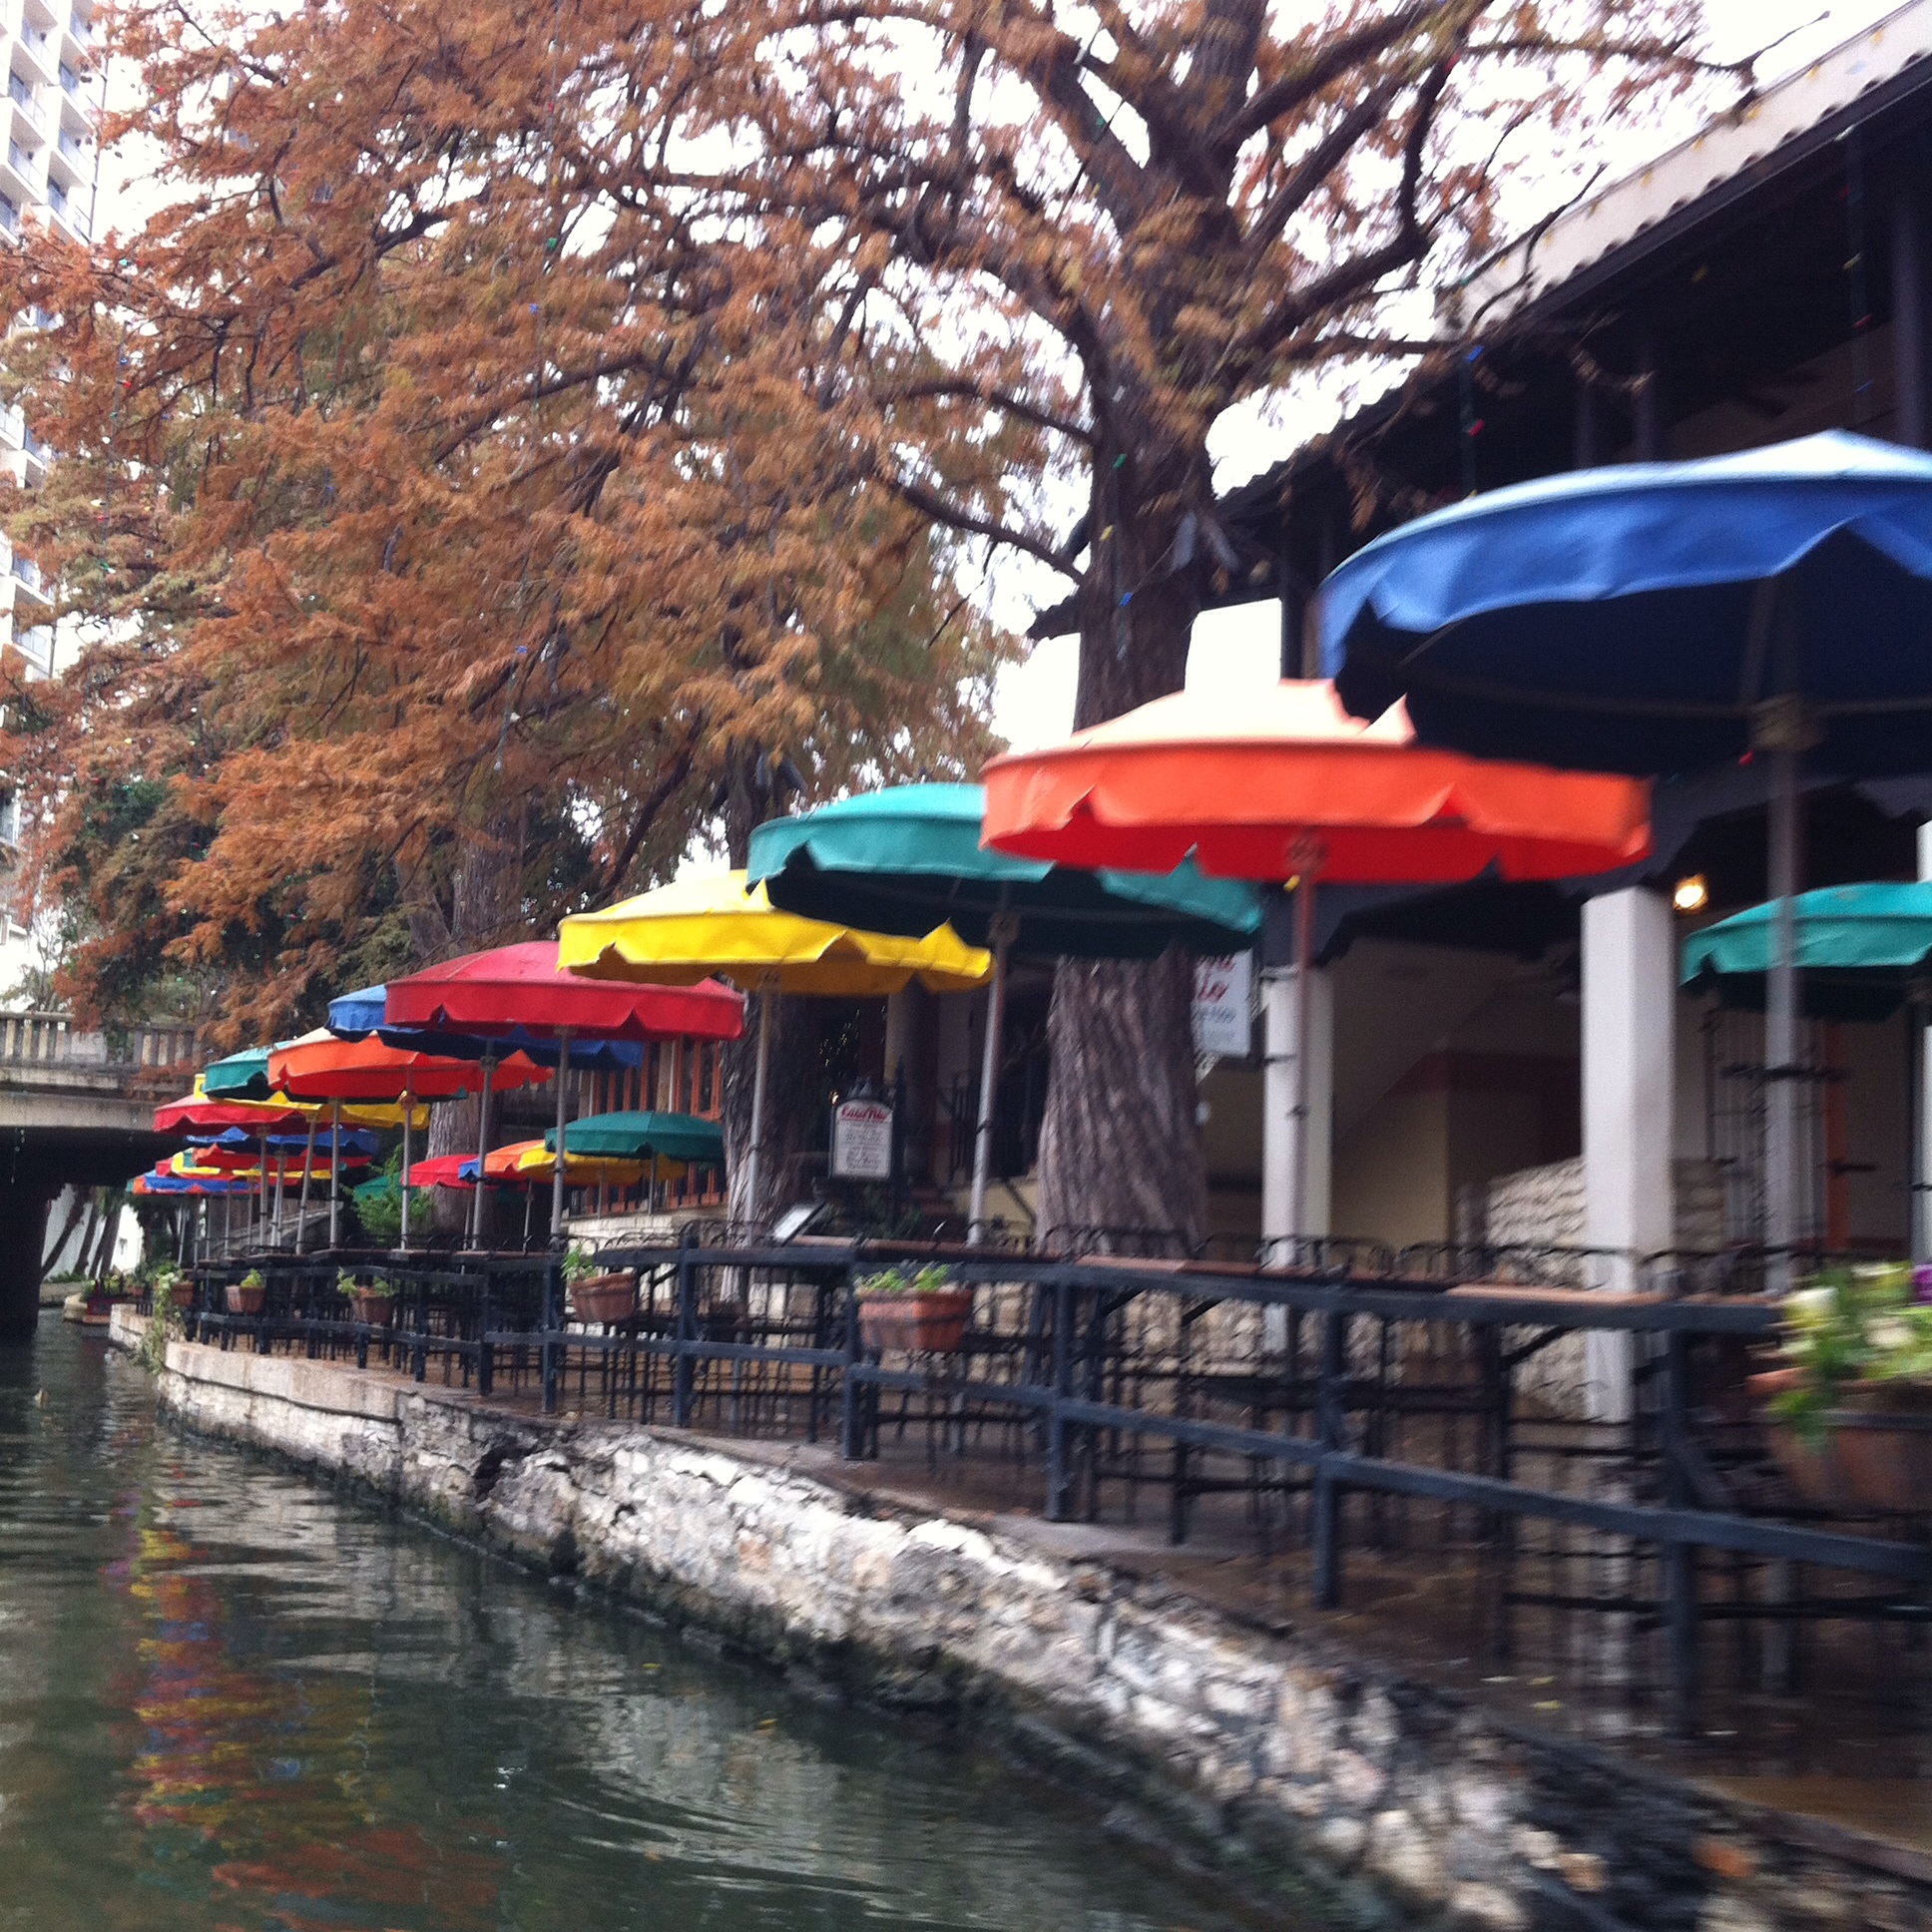 San Antonio riverwalk has a beautiful patio of colorful umbrellas outside Casa Rio which I saw during The Daring Way (TM) course